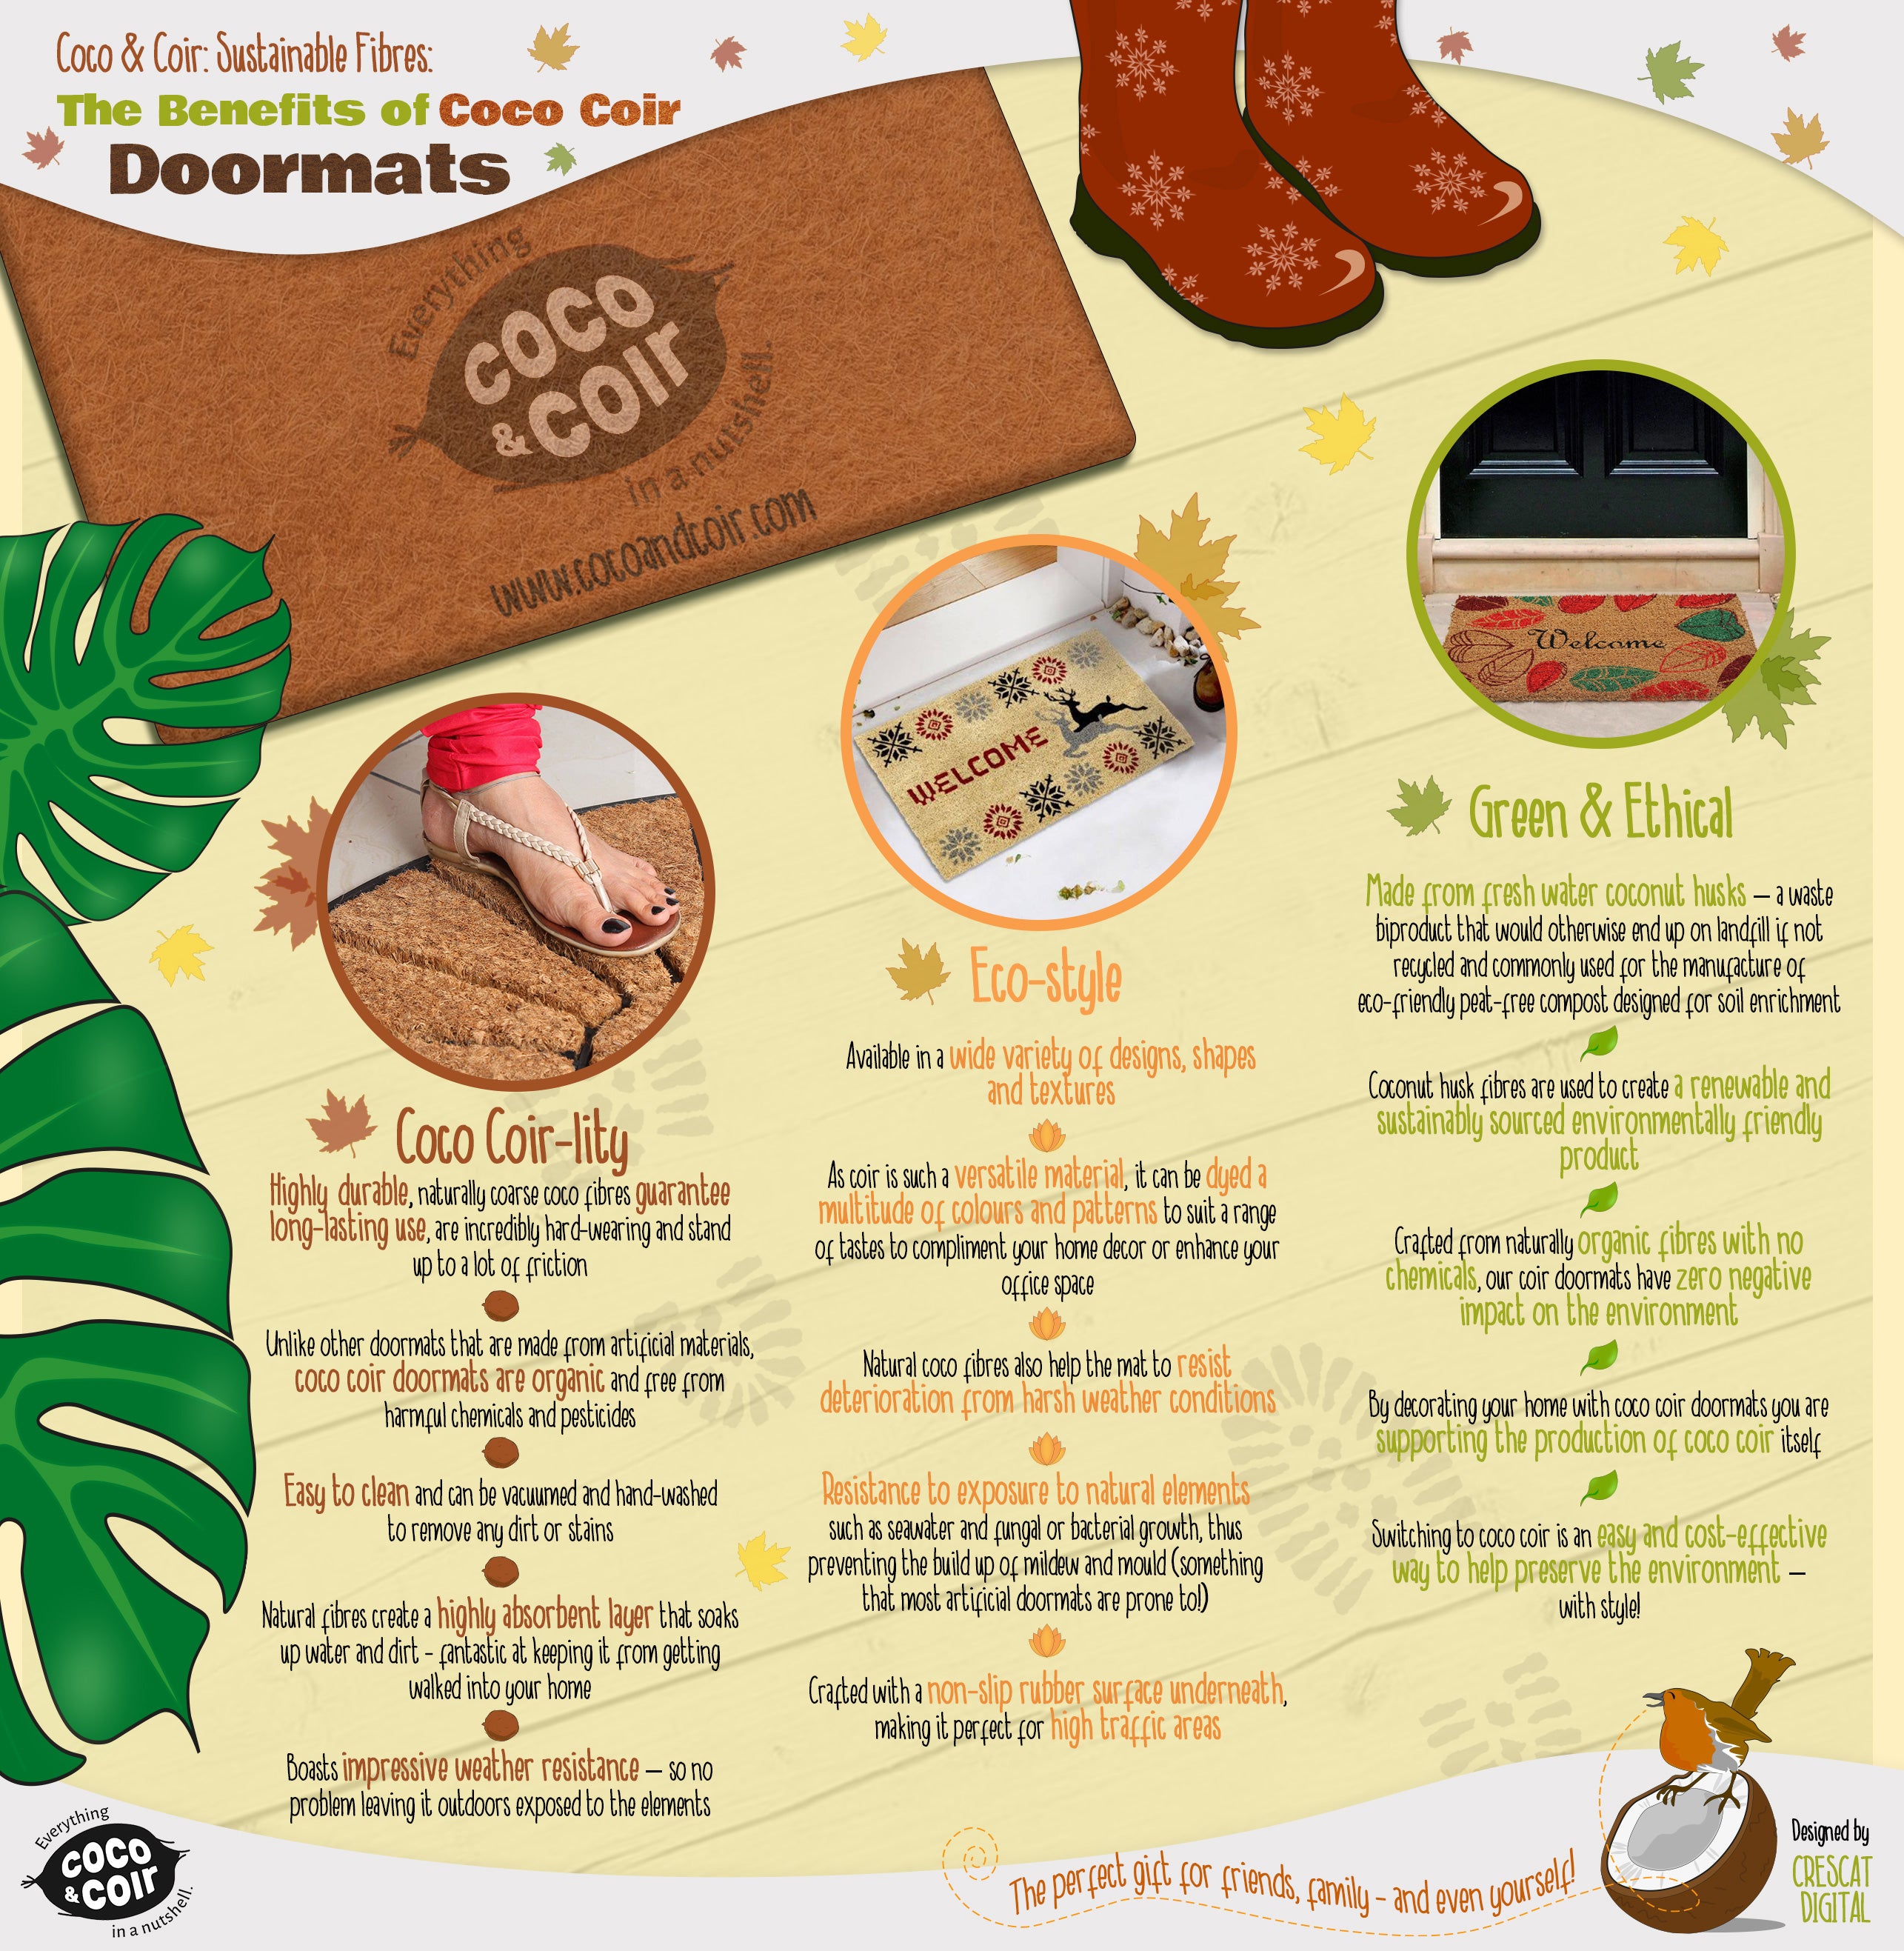 Sustainable Fibres - The Benefits of Coco Coir Doormats Infographic